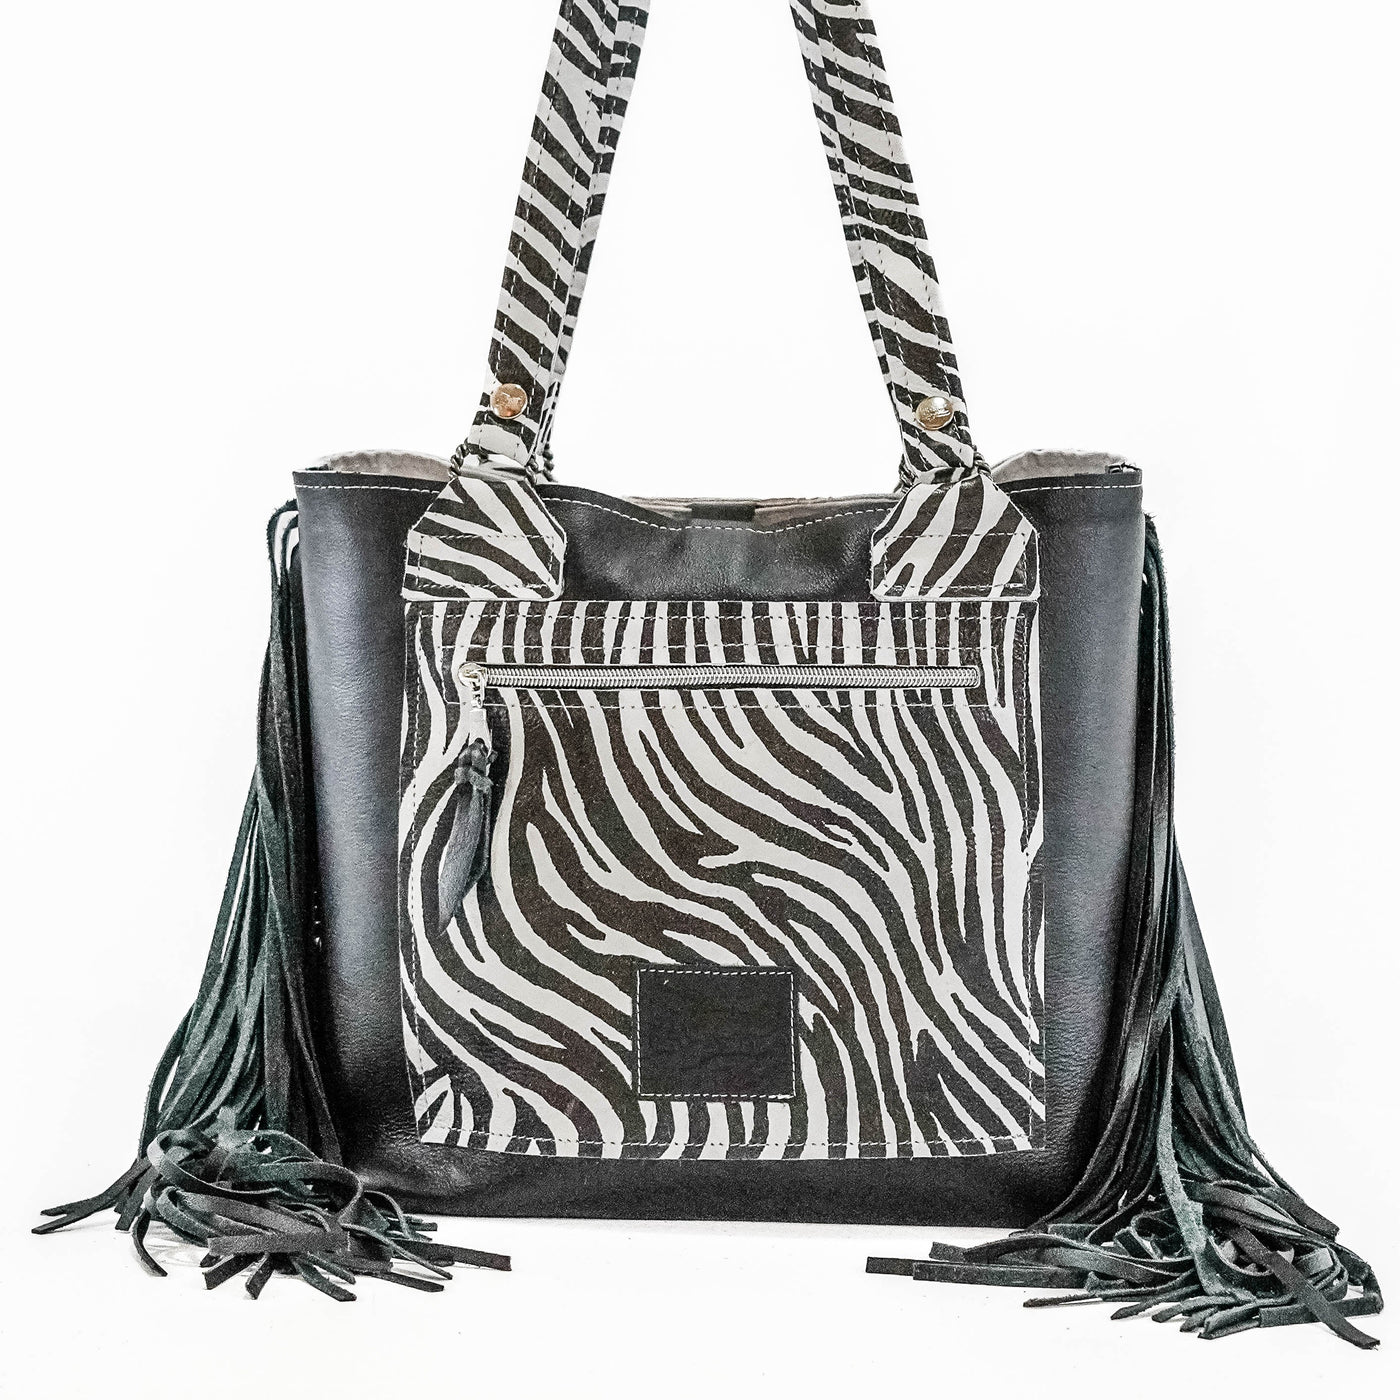 Taylor - Light Brindle w/ Iceland Navajo & Zebra Leather-Taylor-Western-Cowhide-Bags-Handmade-Products-Gifts-Dancing Cactus Designs